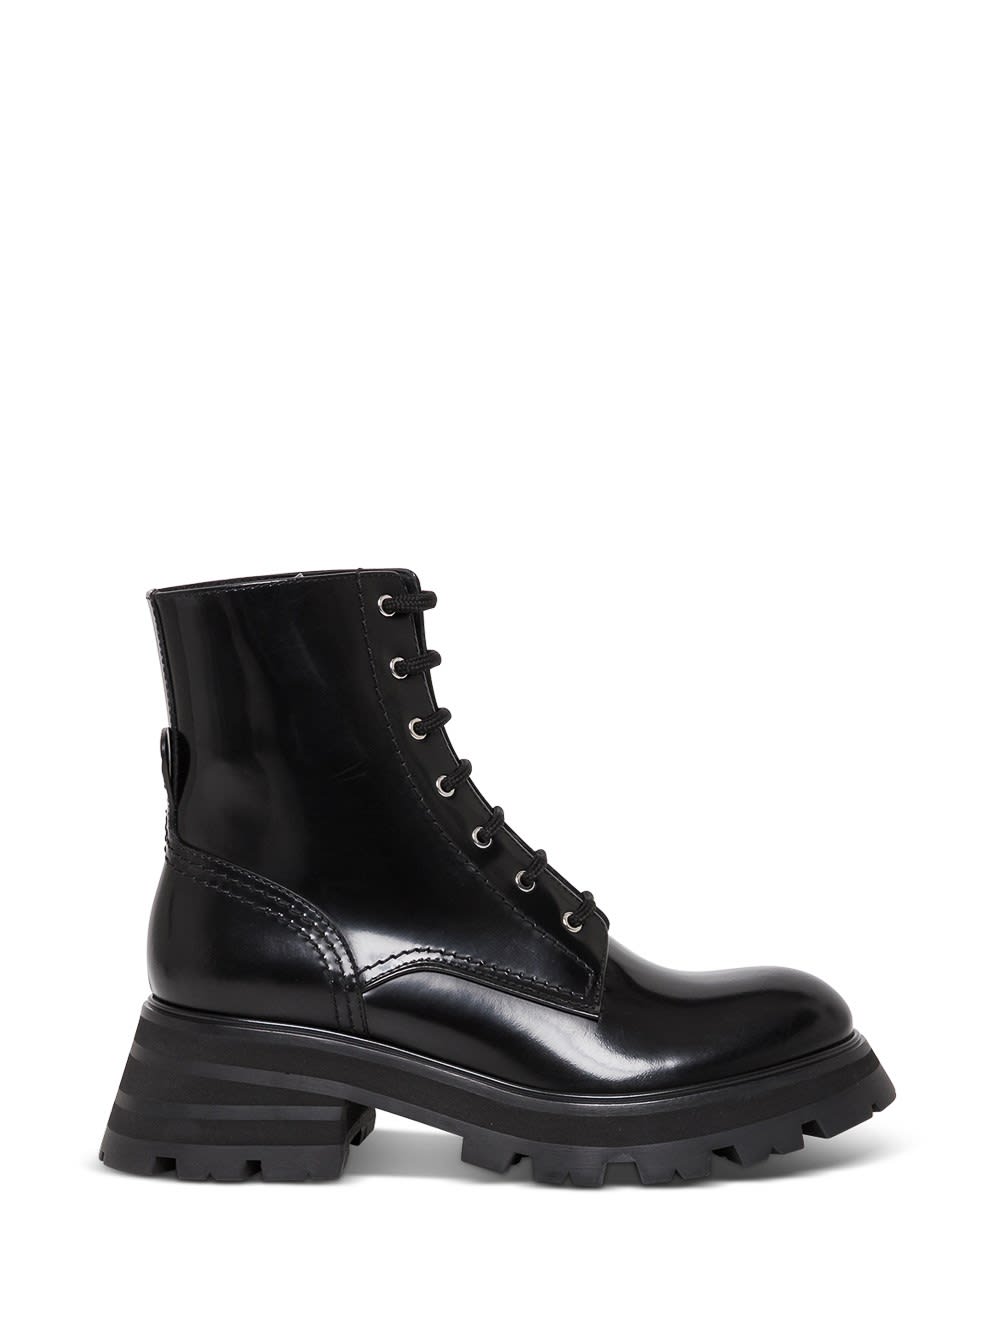 Alexander McQueen Wander Ankle Boots In Black Leather